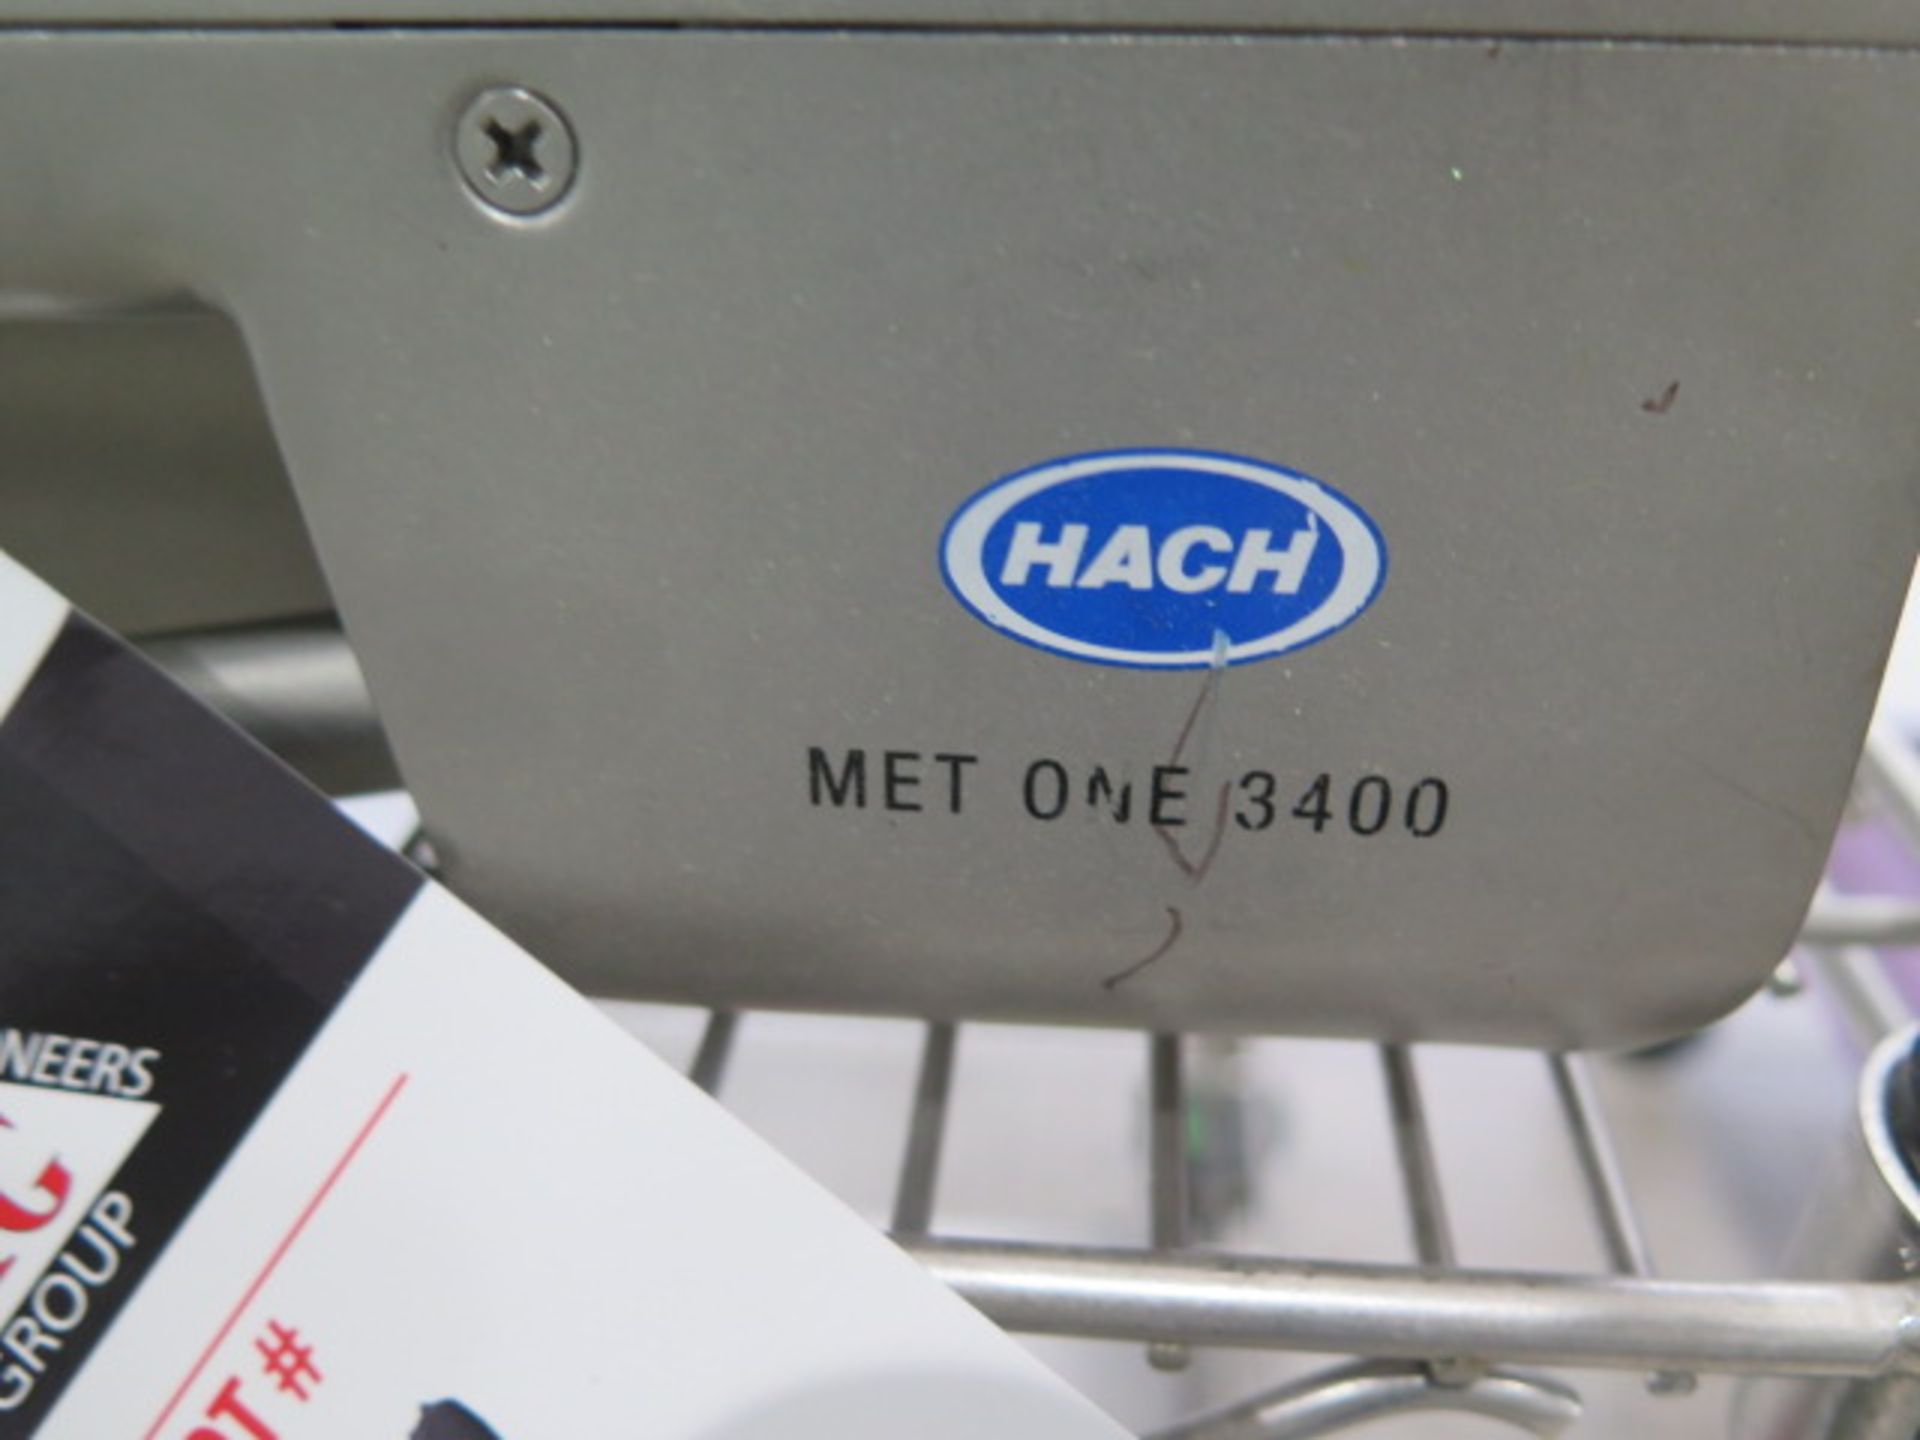 Hach MET ONE 3400 mdl. 3445 Particle Counter w/ Printer (SOLD AS-IS - NO WARRANTY) - Image 7 of 7